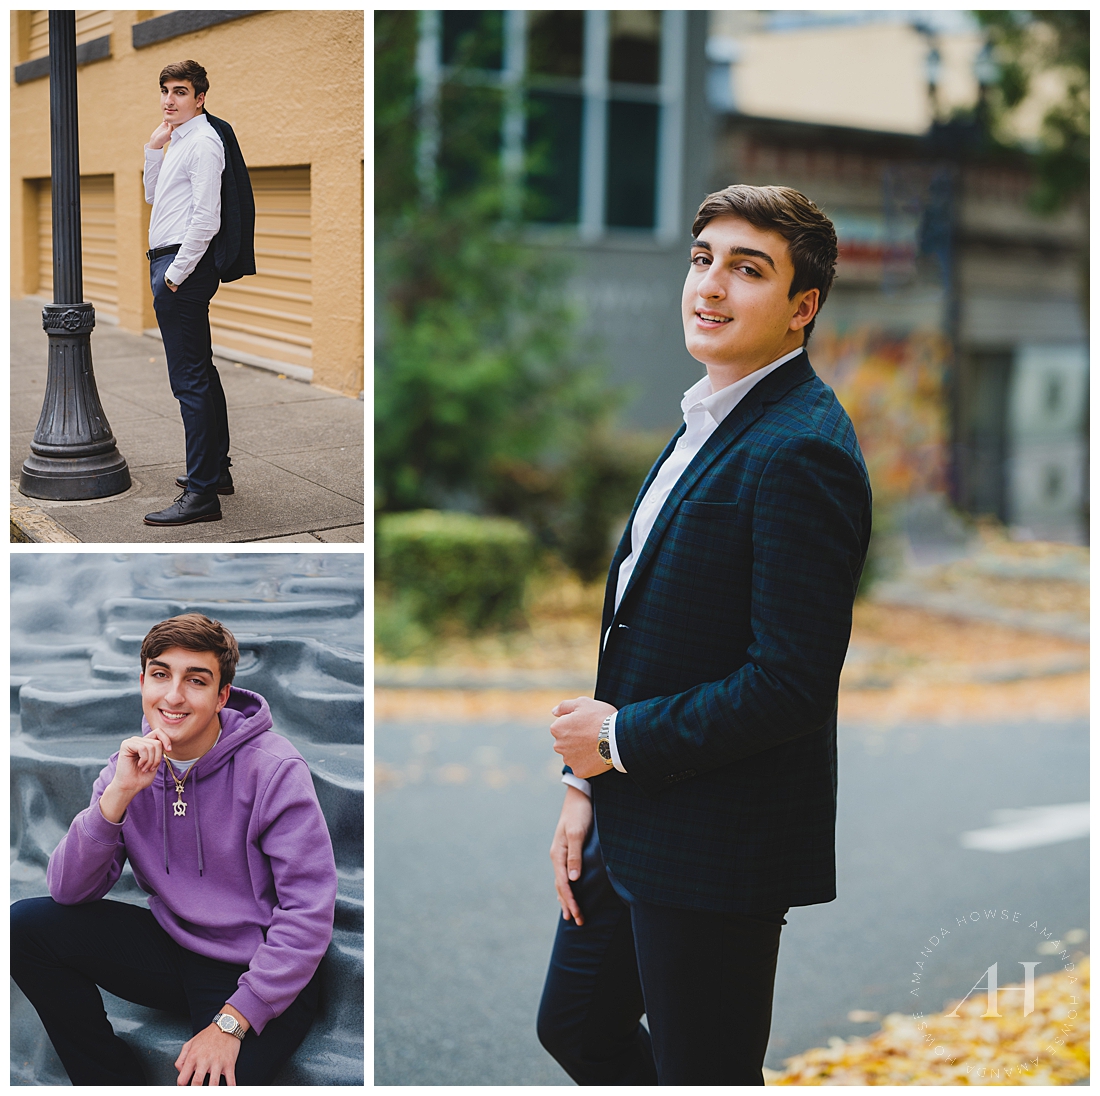 PNW High School Guy Portrait Session | Best Outfit Ideas For Senior Photos For Guys | Photographed by the Best Tacoma, Washington Senior Photographer Amanda Howse Photography